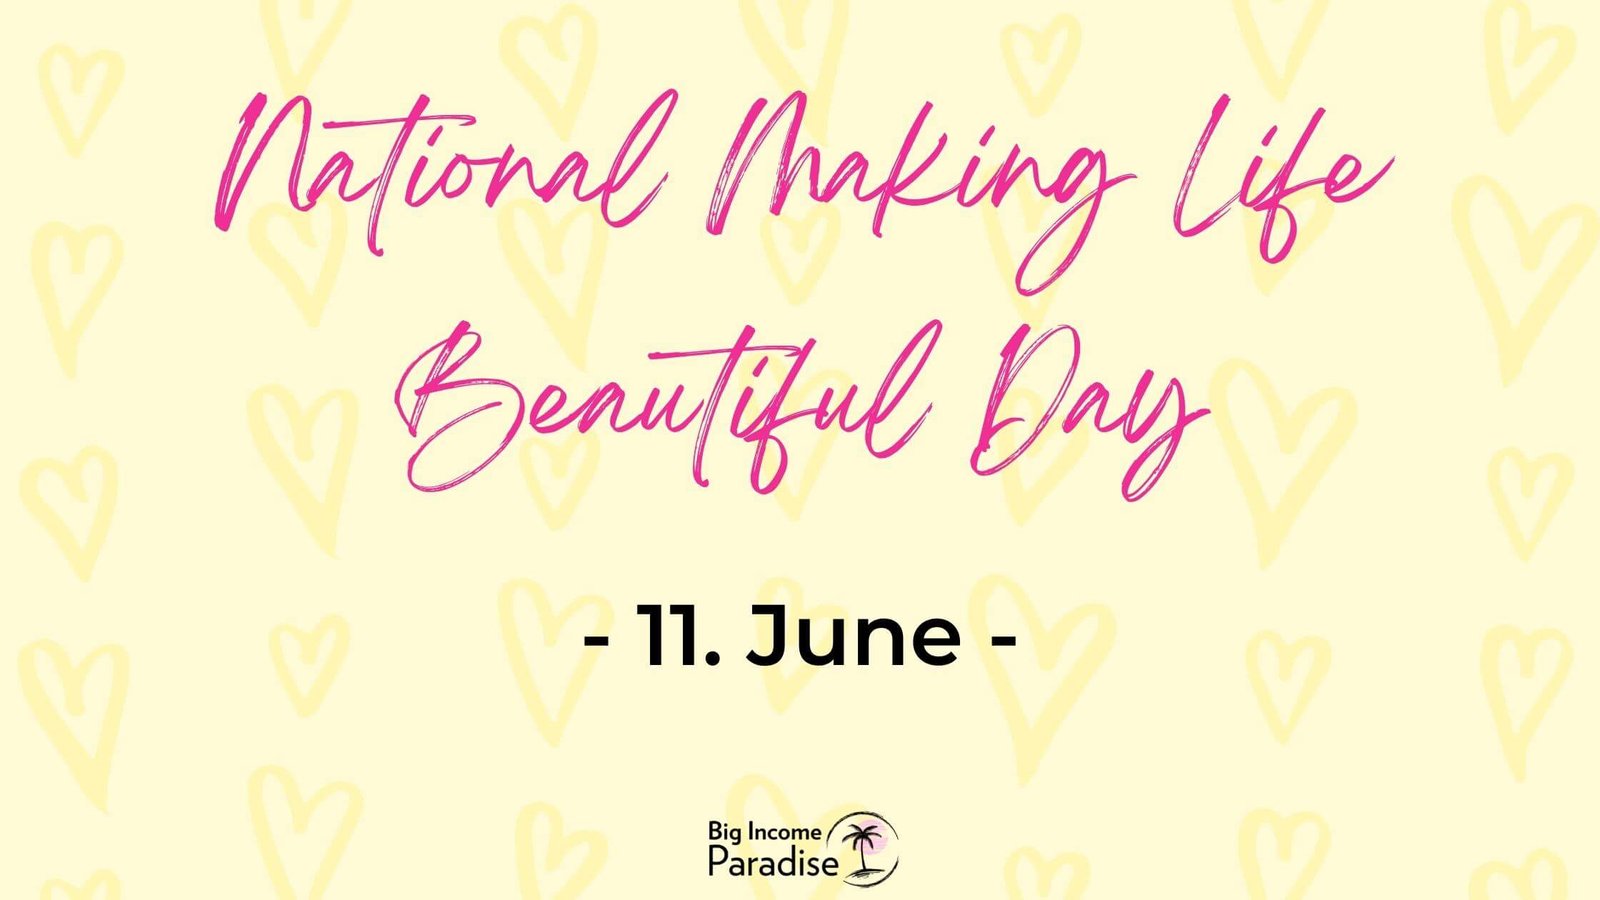 National Making Life Beautiful Day - content ideas